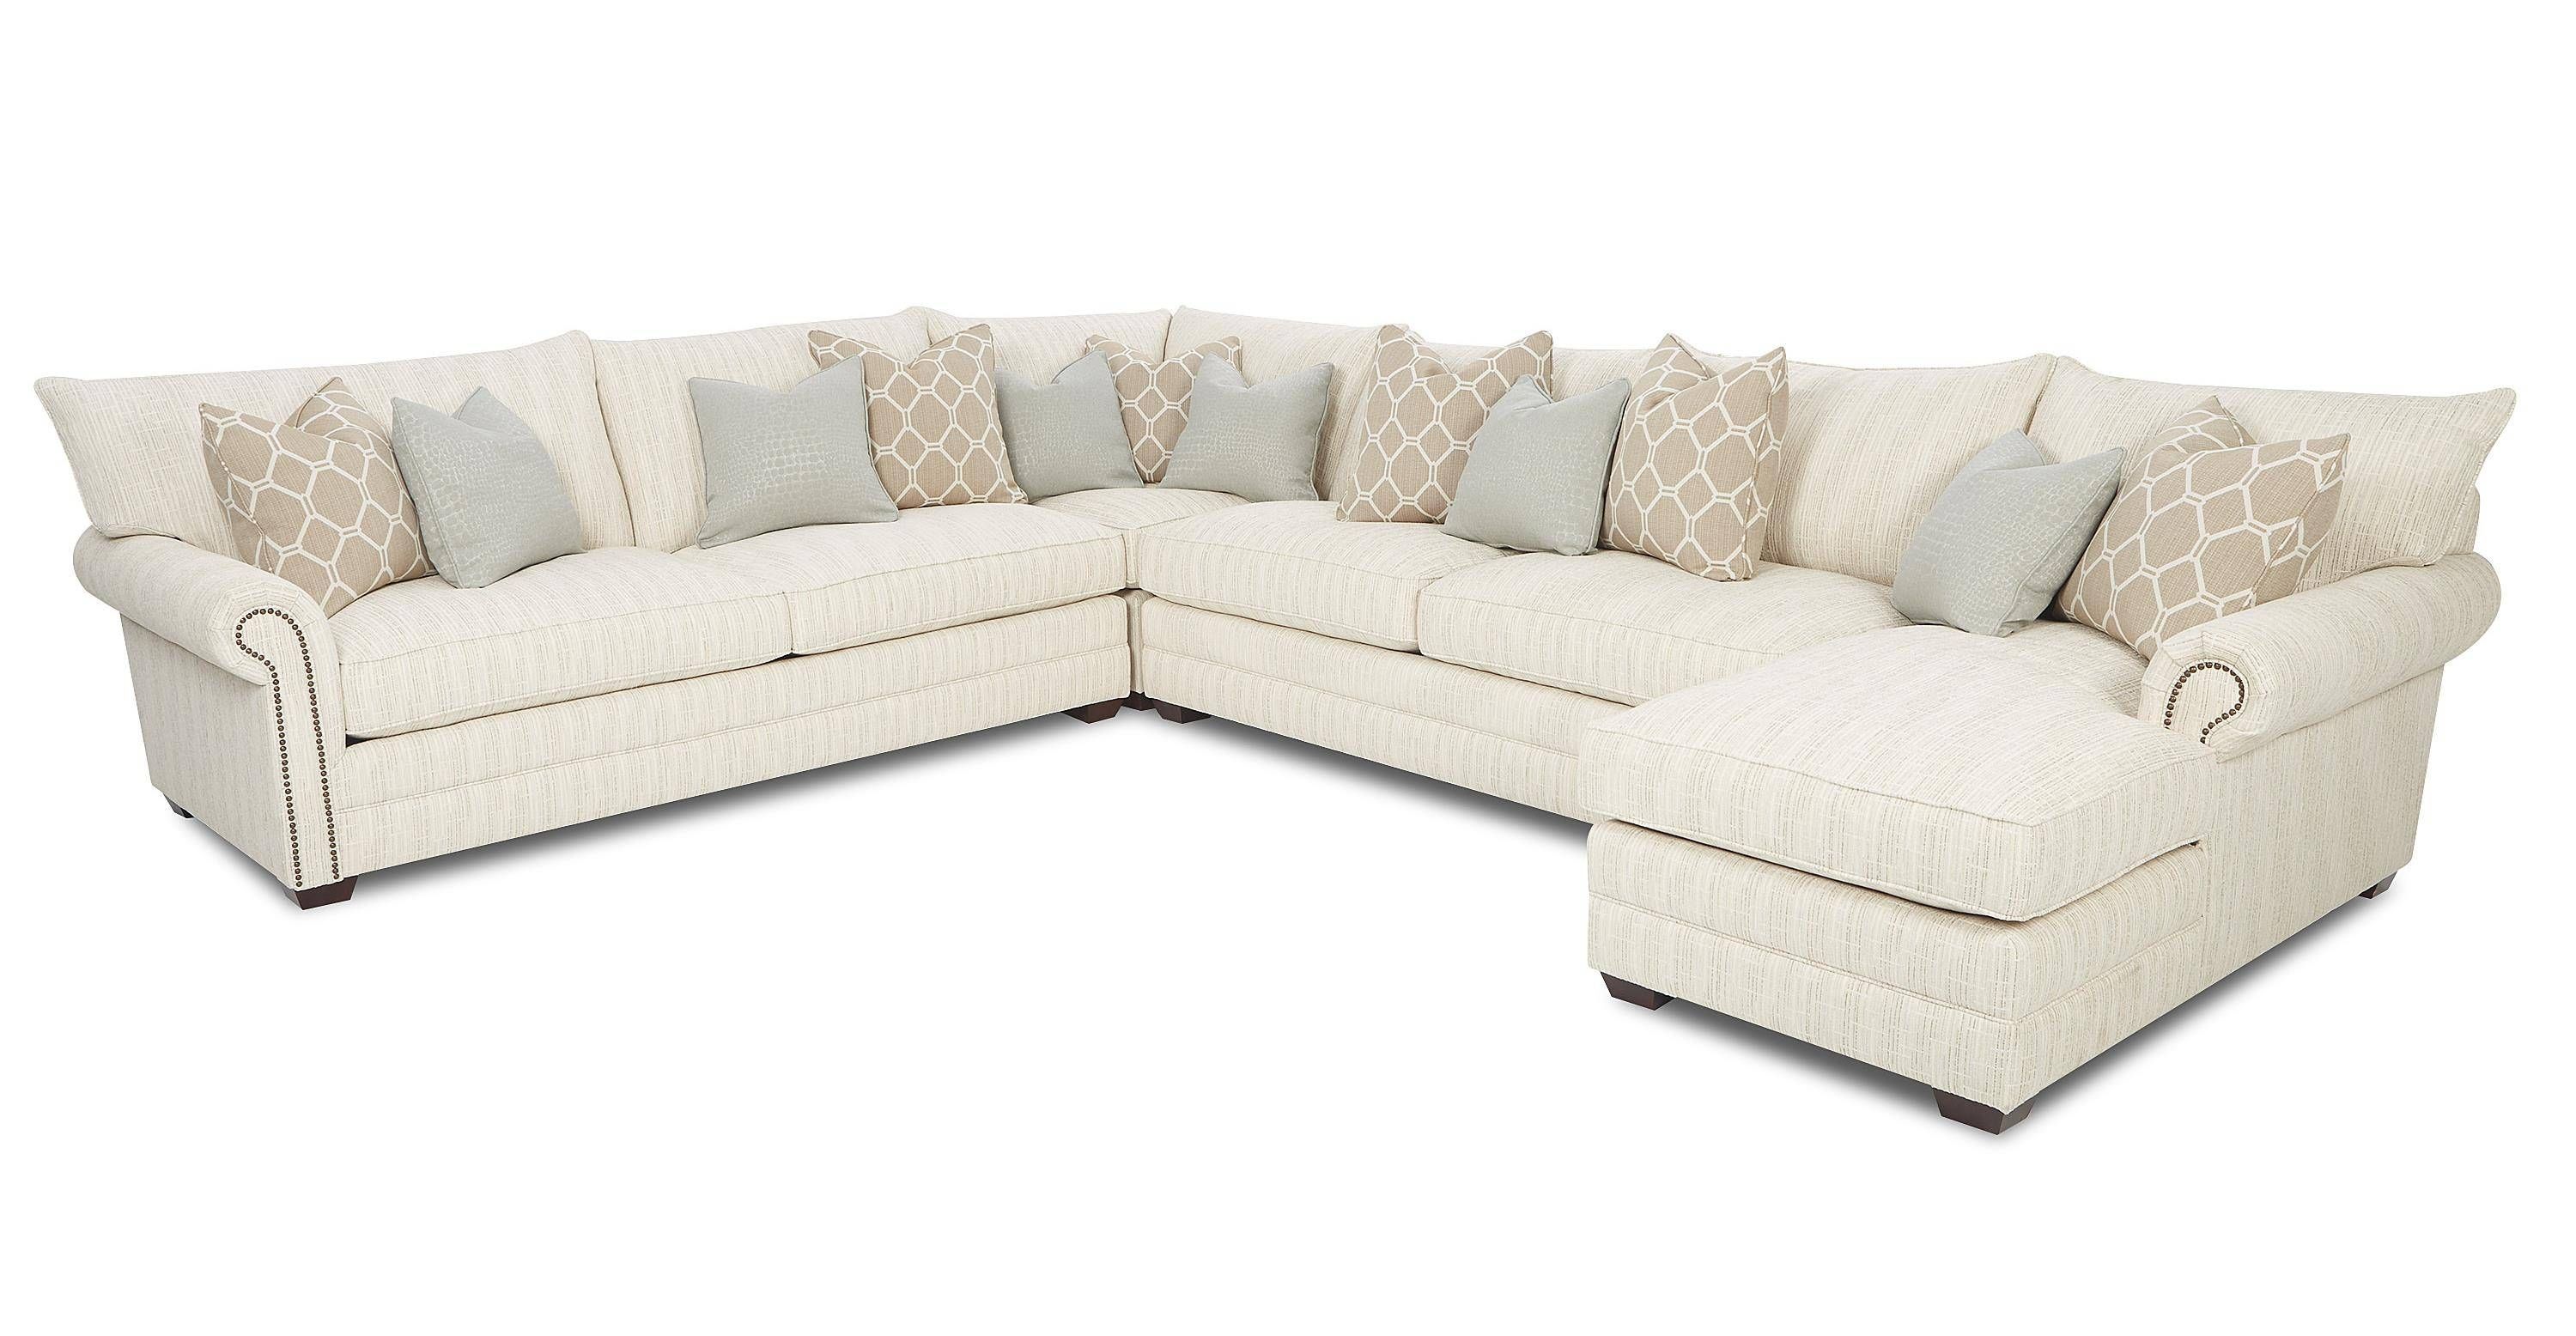 traditional sectional sofas living room furniture